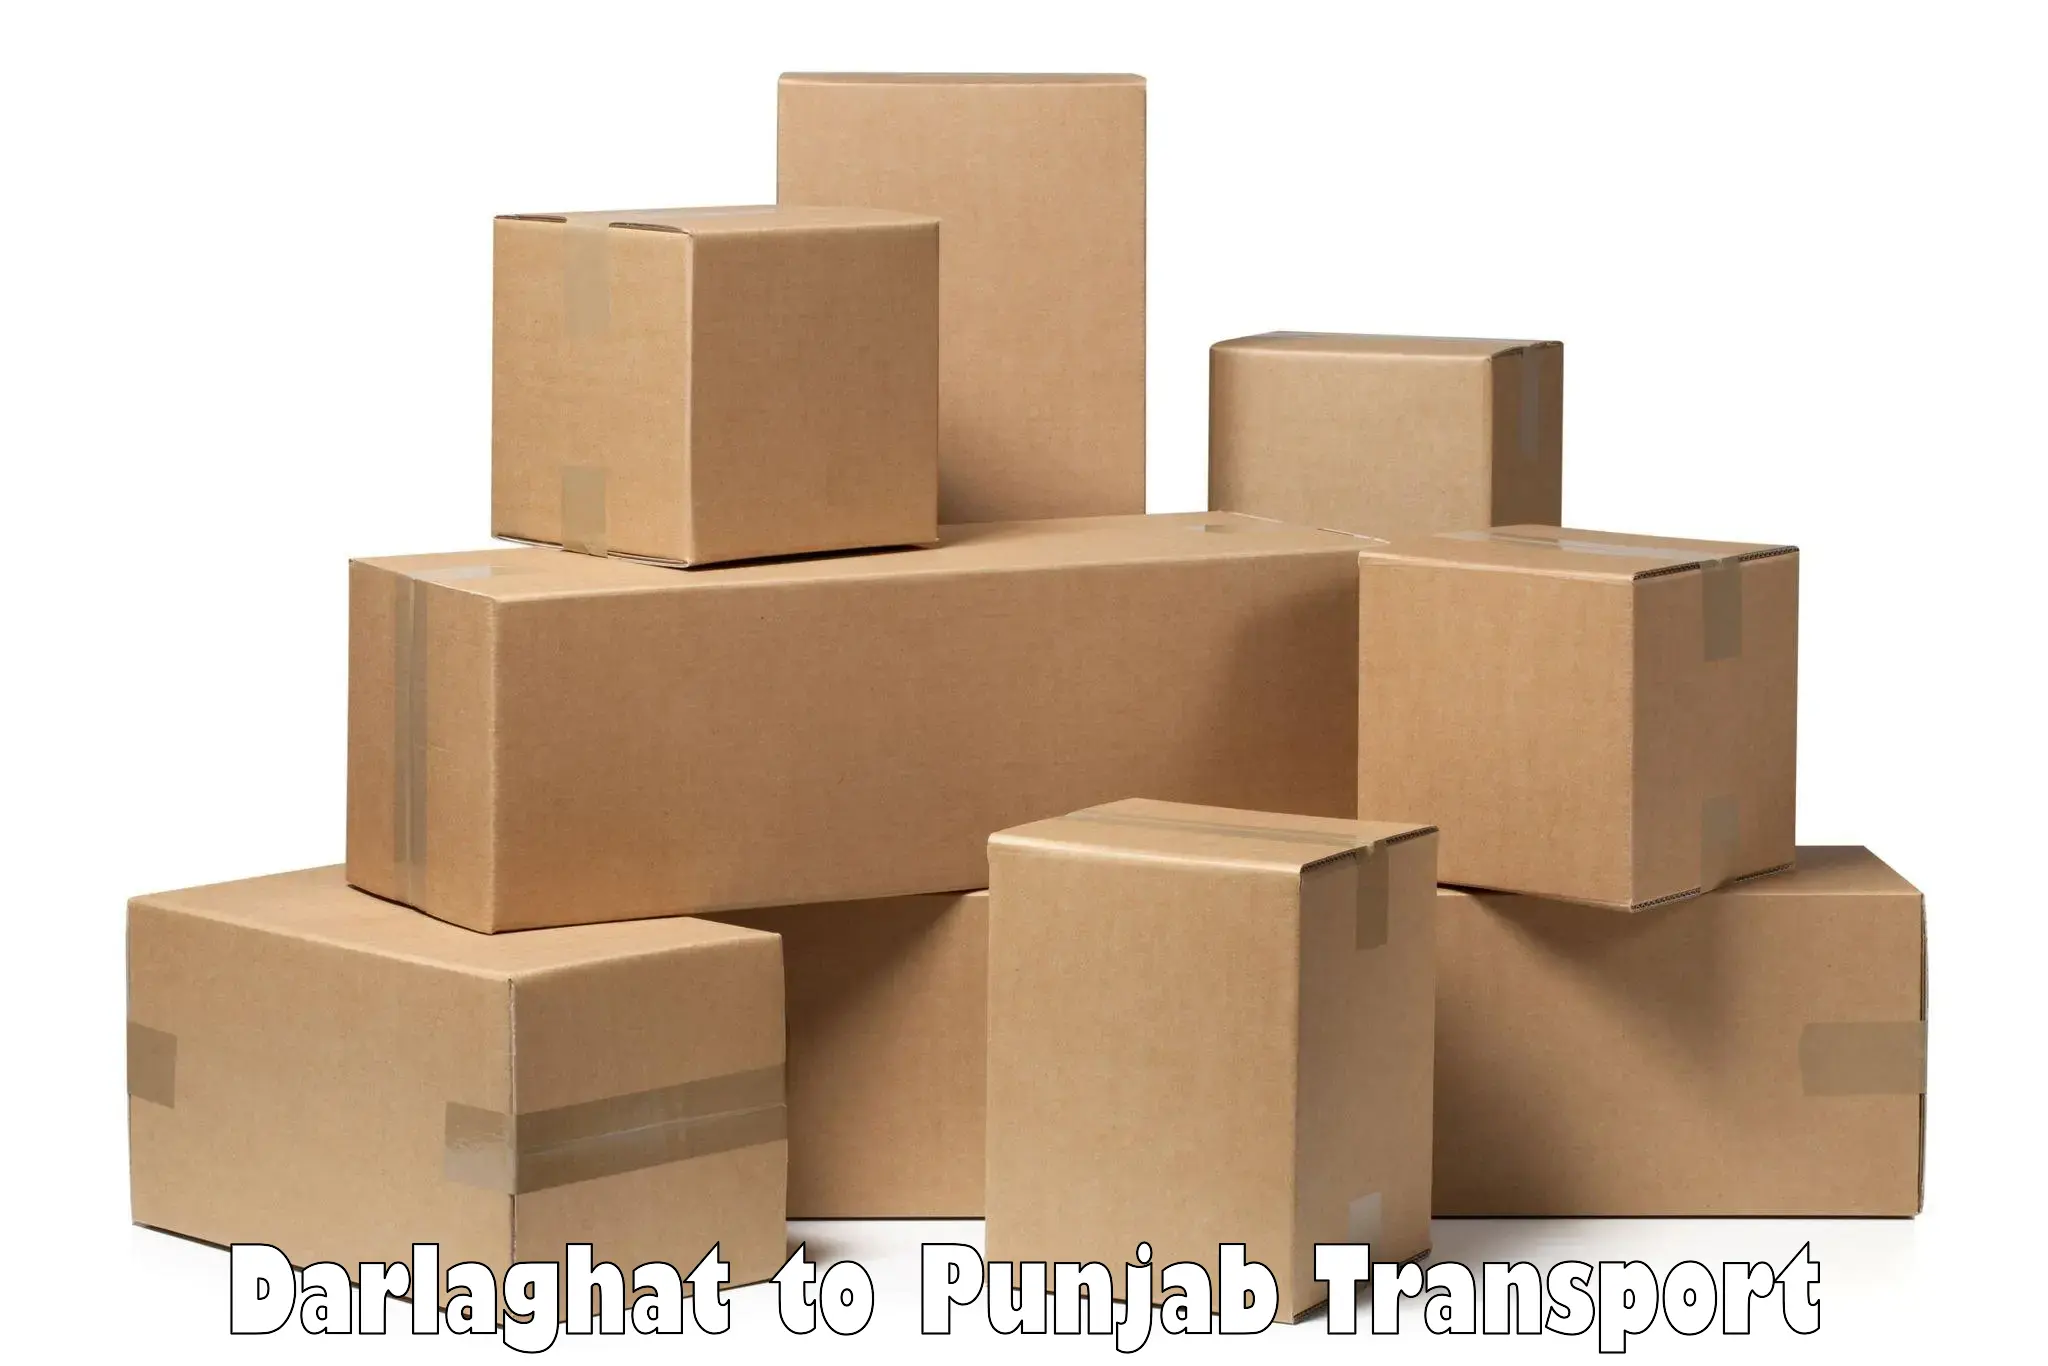 Daily parcel service transport Darlaghat to Jagraon